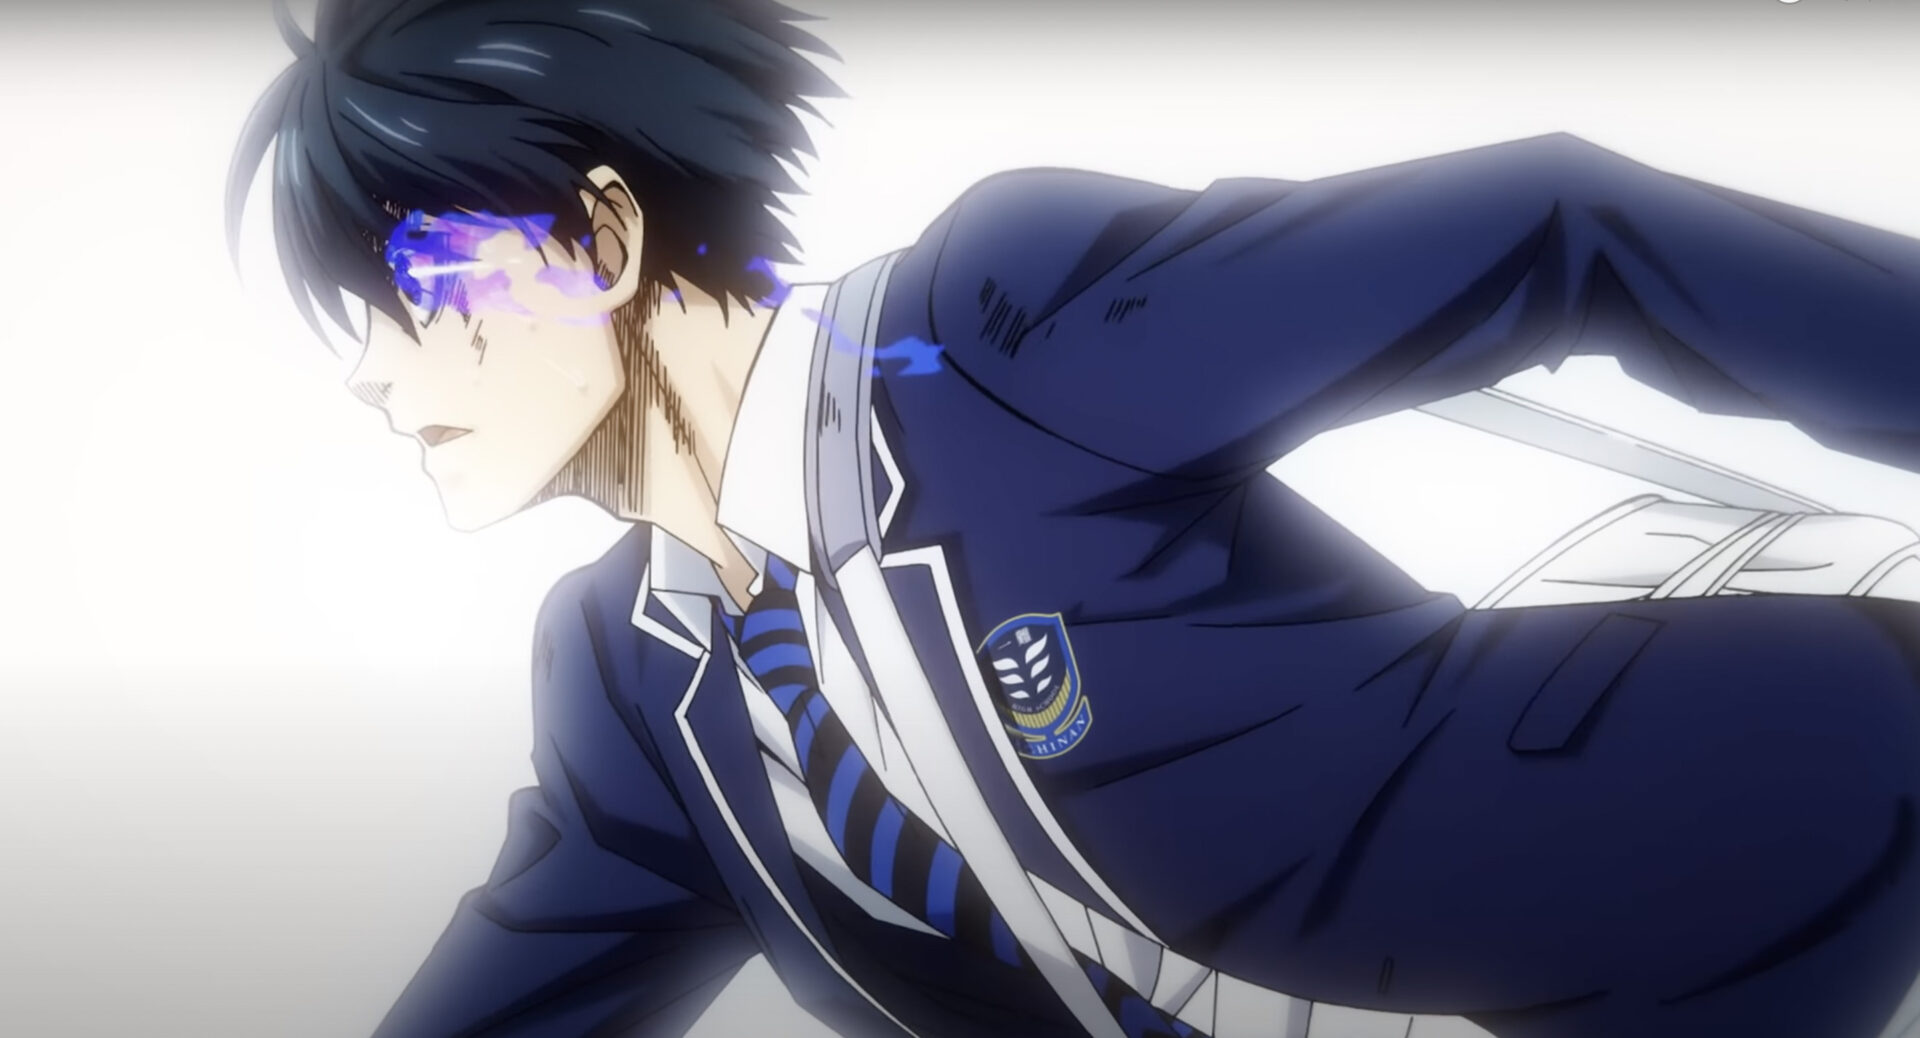 New Blue Lock PV Offers a First Look at its Stunning Animation